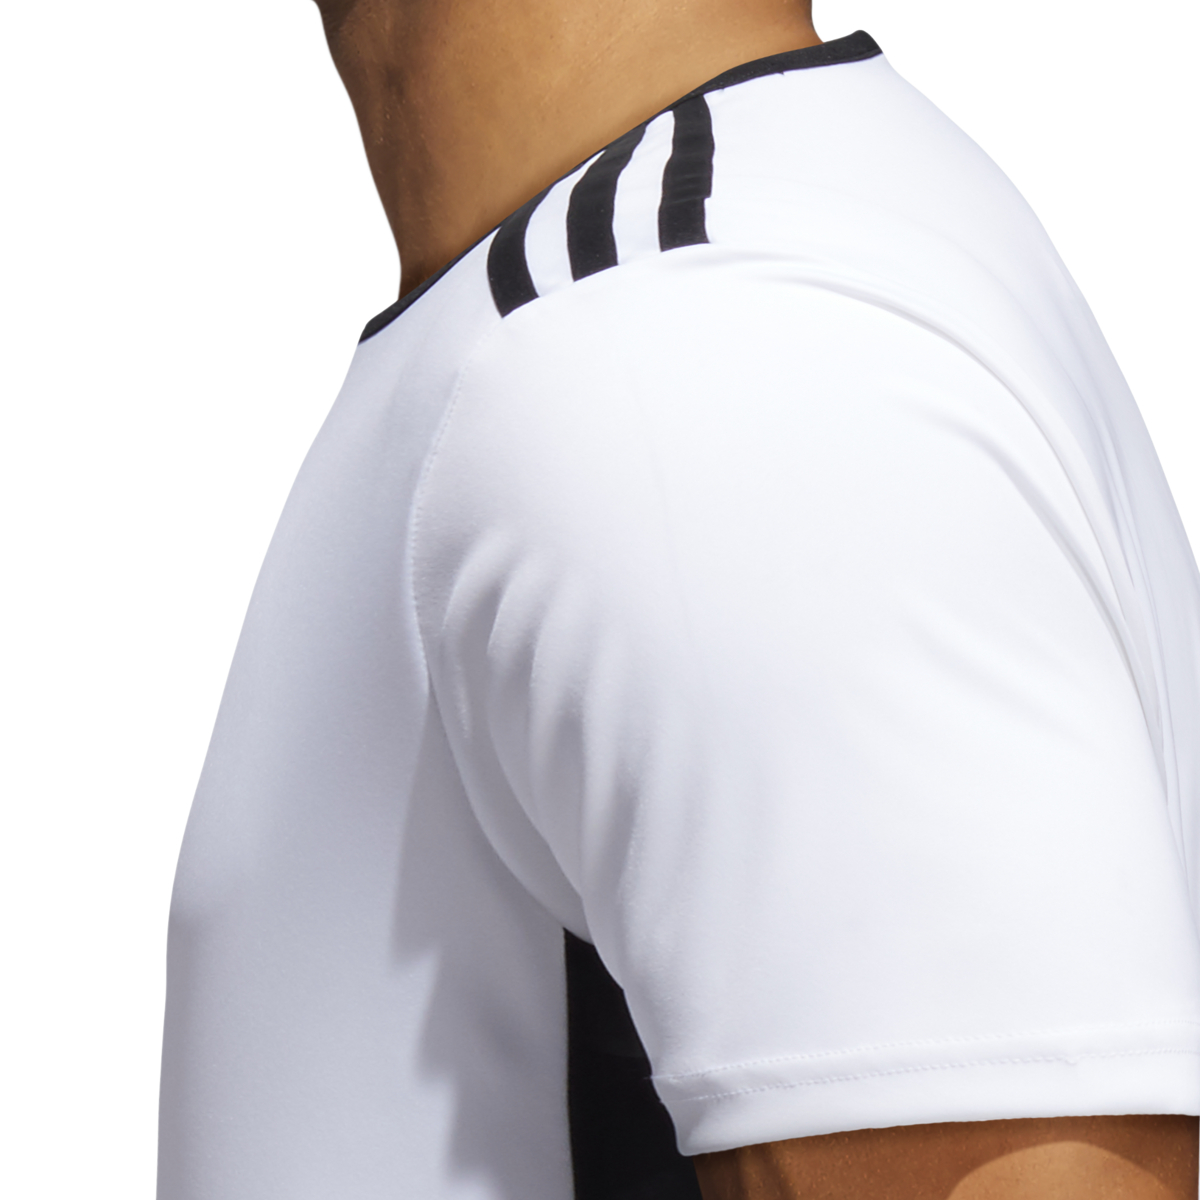 Adidas Men's Soccer Entrada 18 Jersey Adidas - Ships Directly From Adidas - image 5 of 6